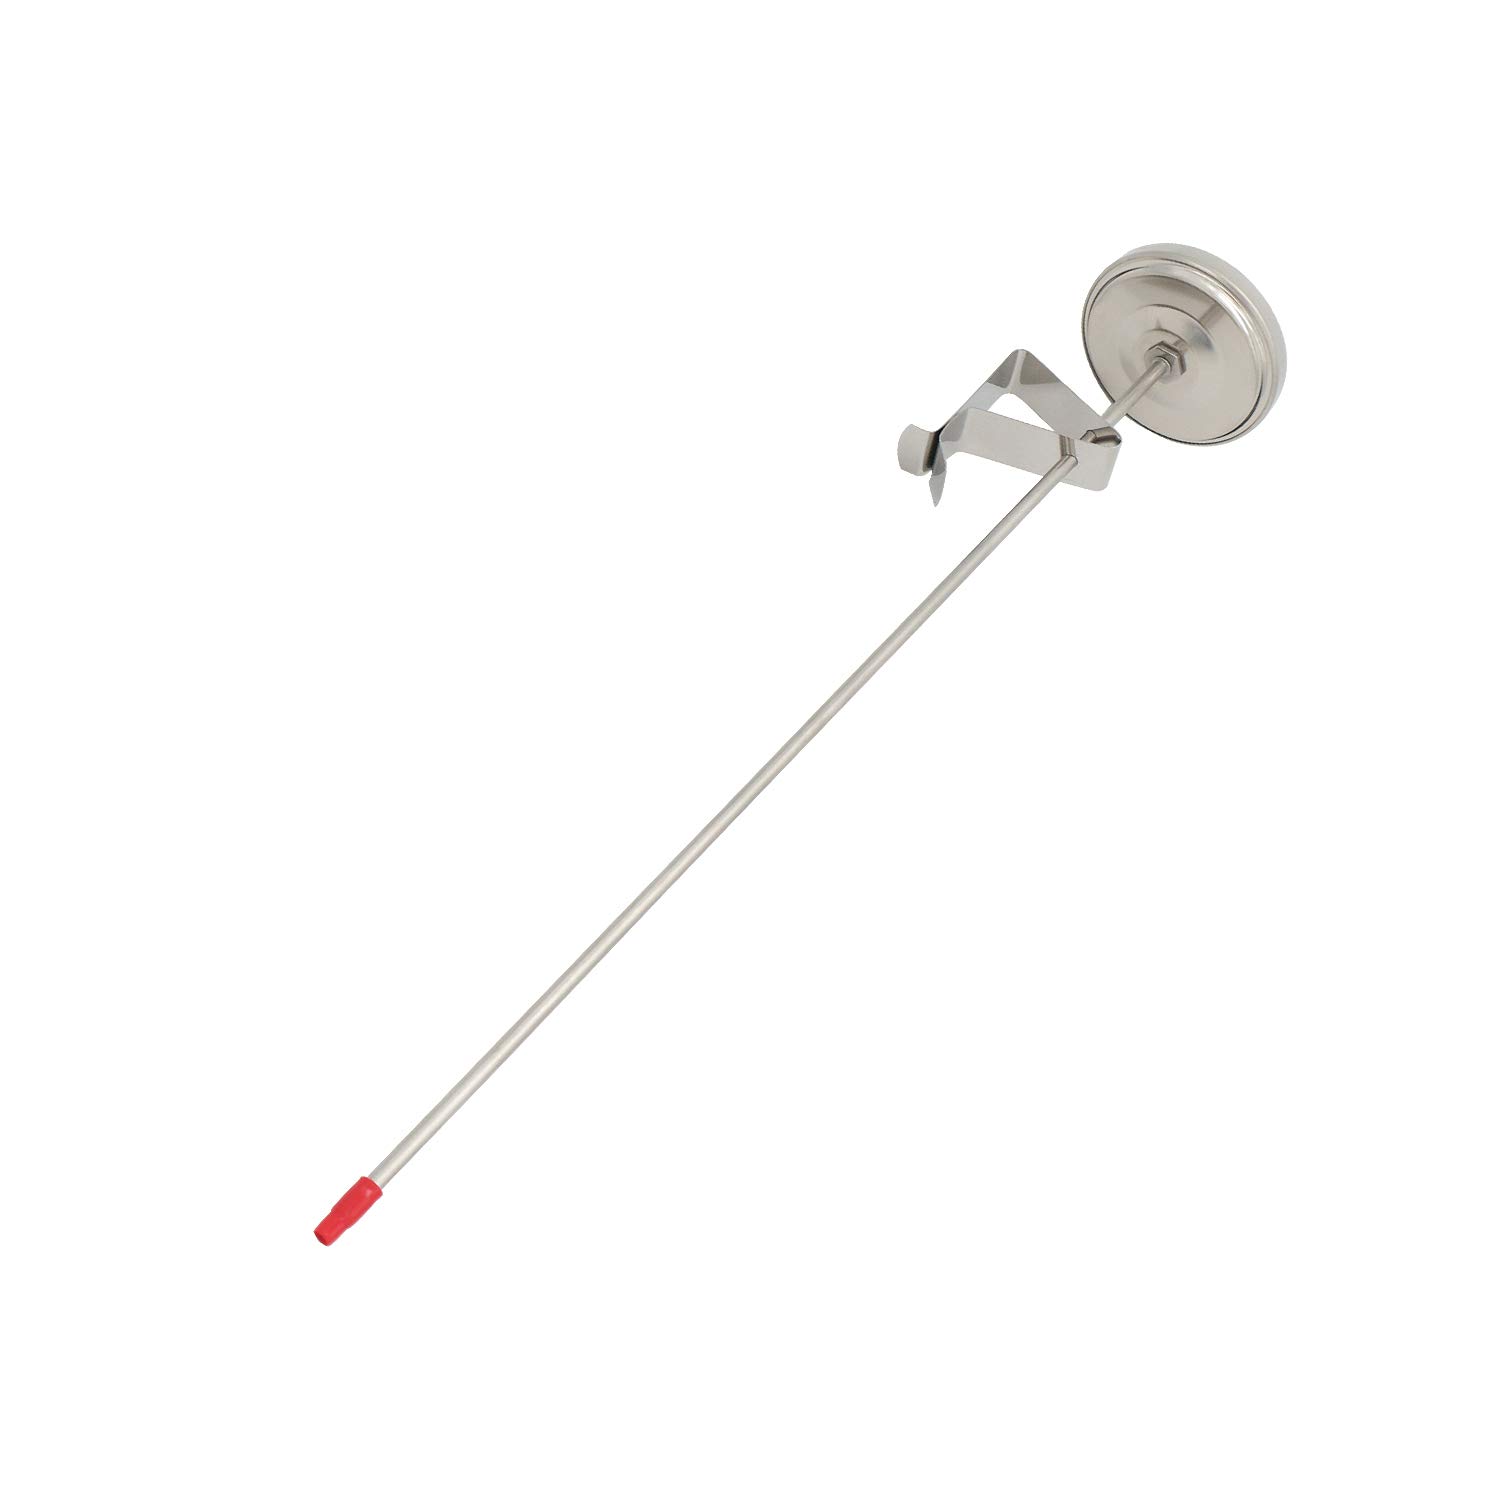 CRBrewBeer Homebrew Kettle Clip On Thermometer,Dial Thermometer,12" Stainless Steel Stem Meat Cooking Thermometer